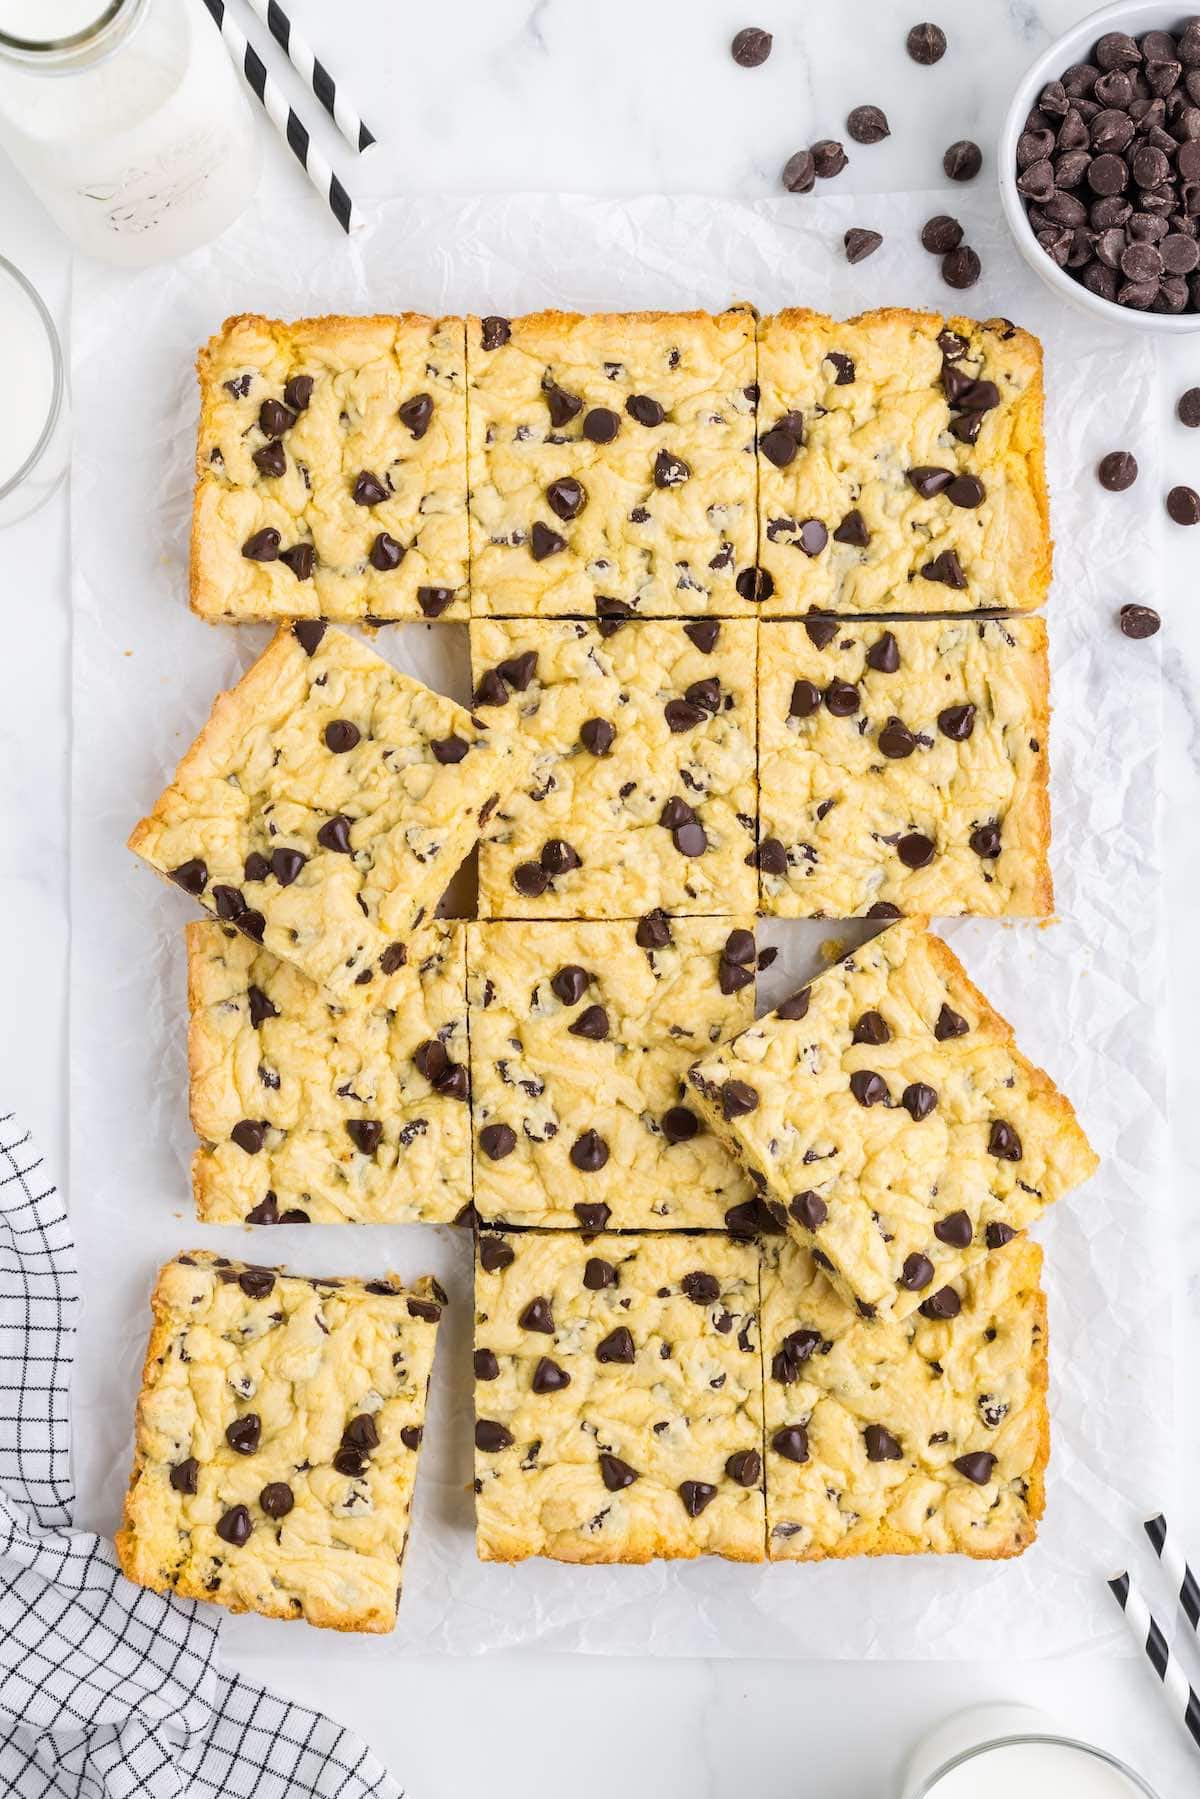 Cake Mix Chocolate Chip Cookie Bars cut into squares.